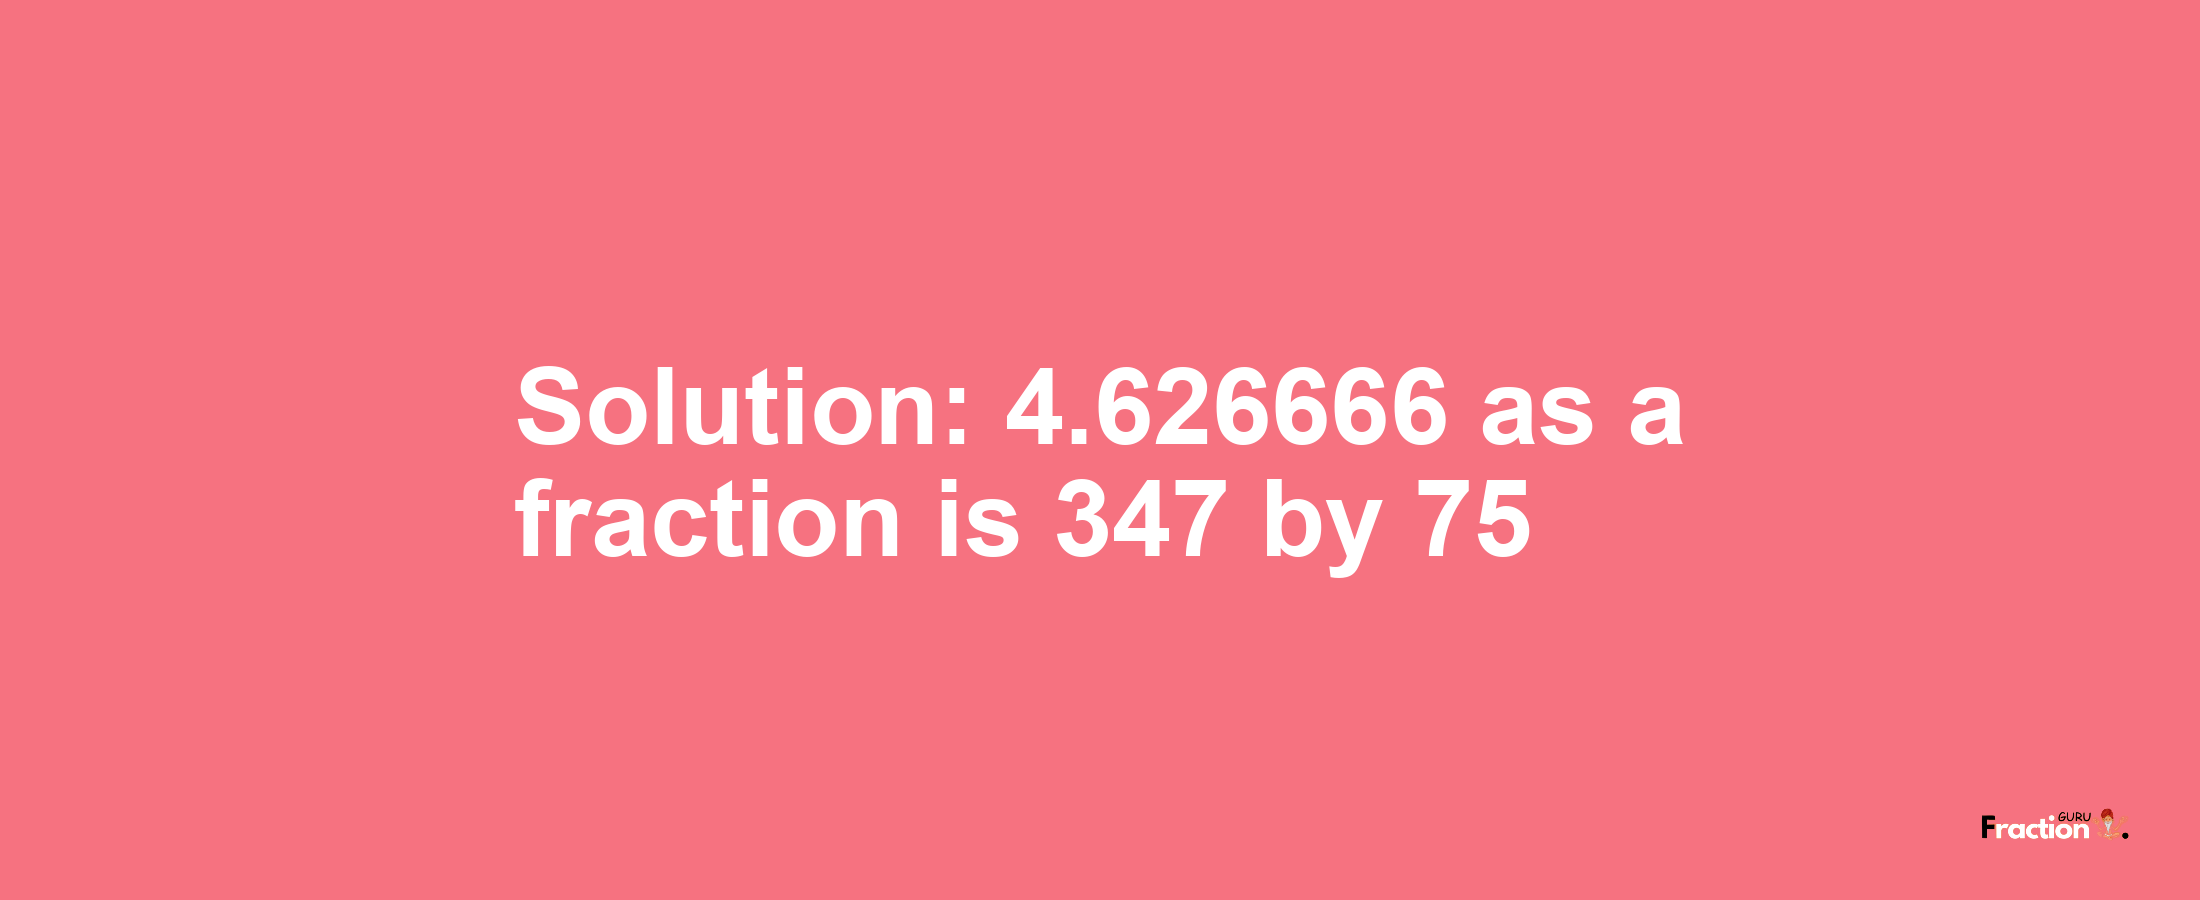 Solution:4.626666 as a fraction is 347/75